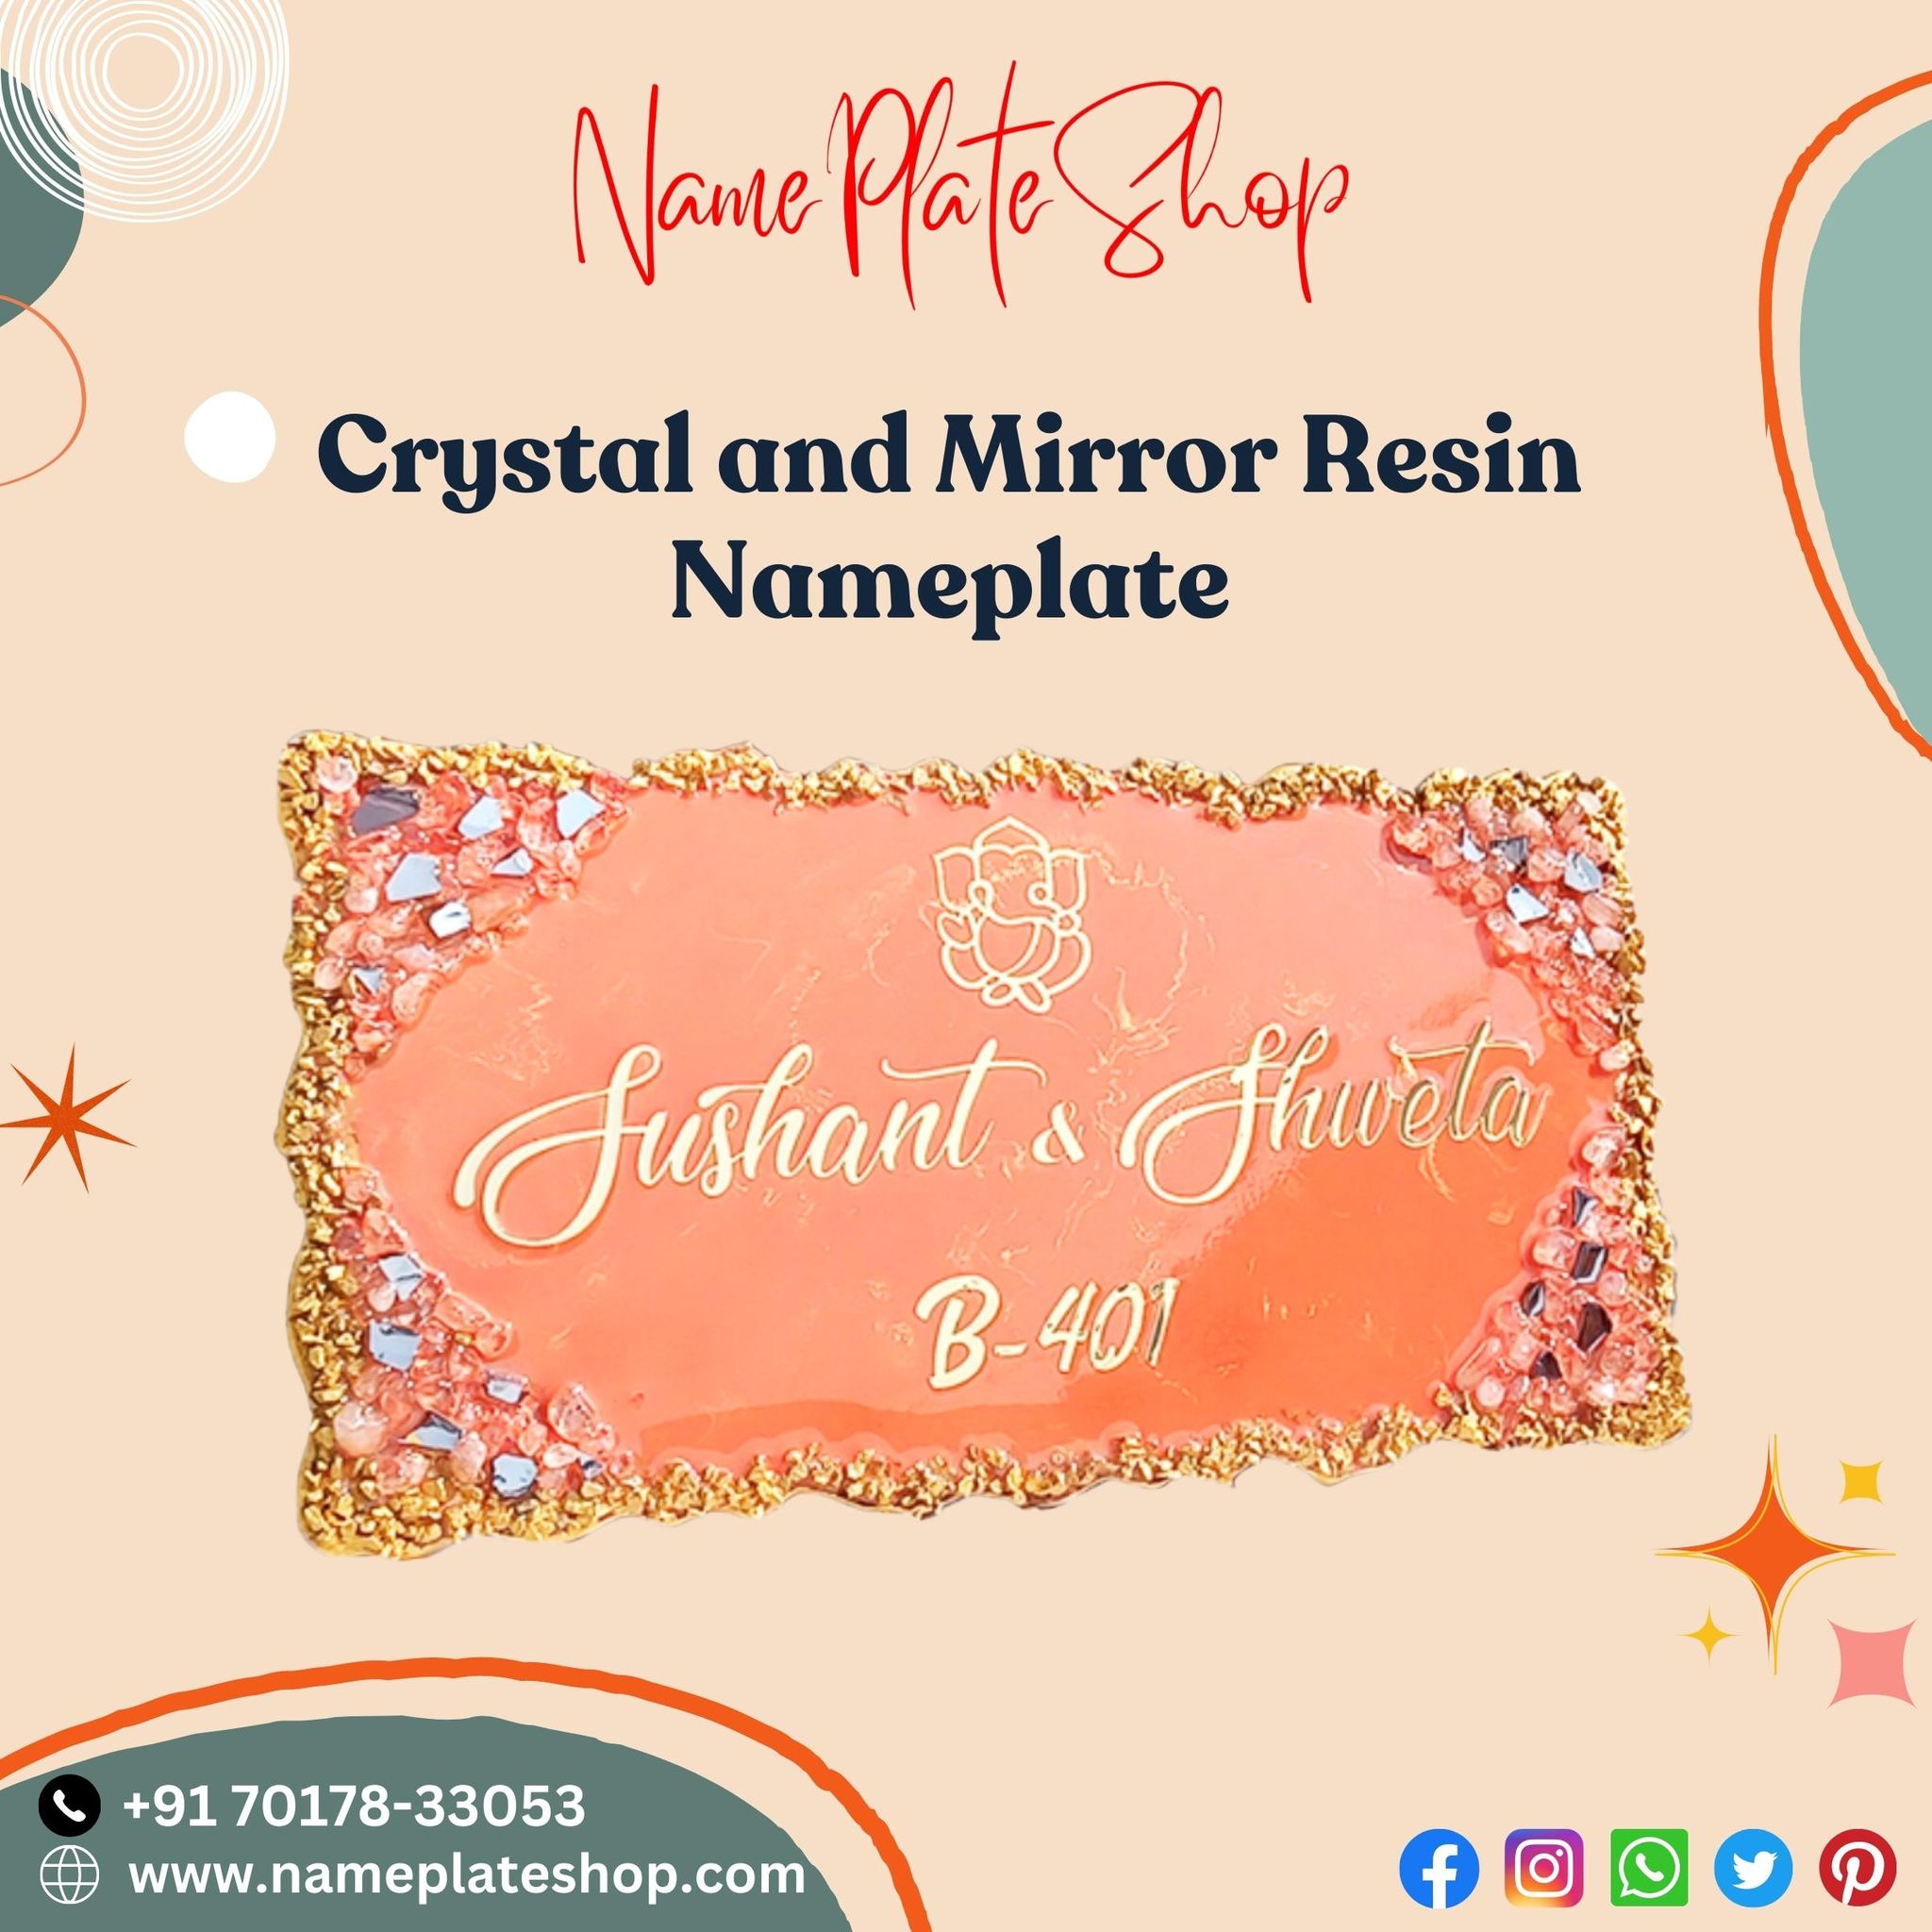 Illuminate Your Home's Entrance with a Crystal and Mirror Resin Nameplate